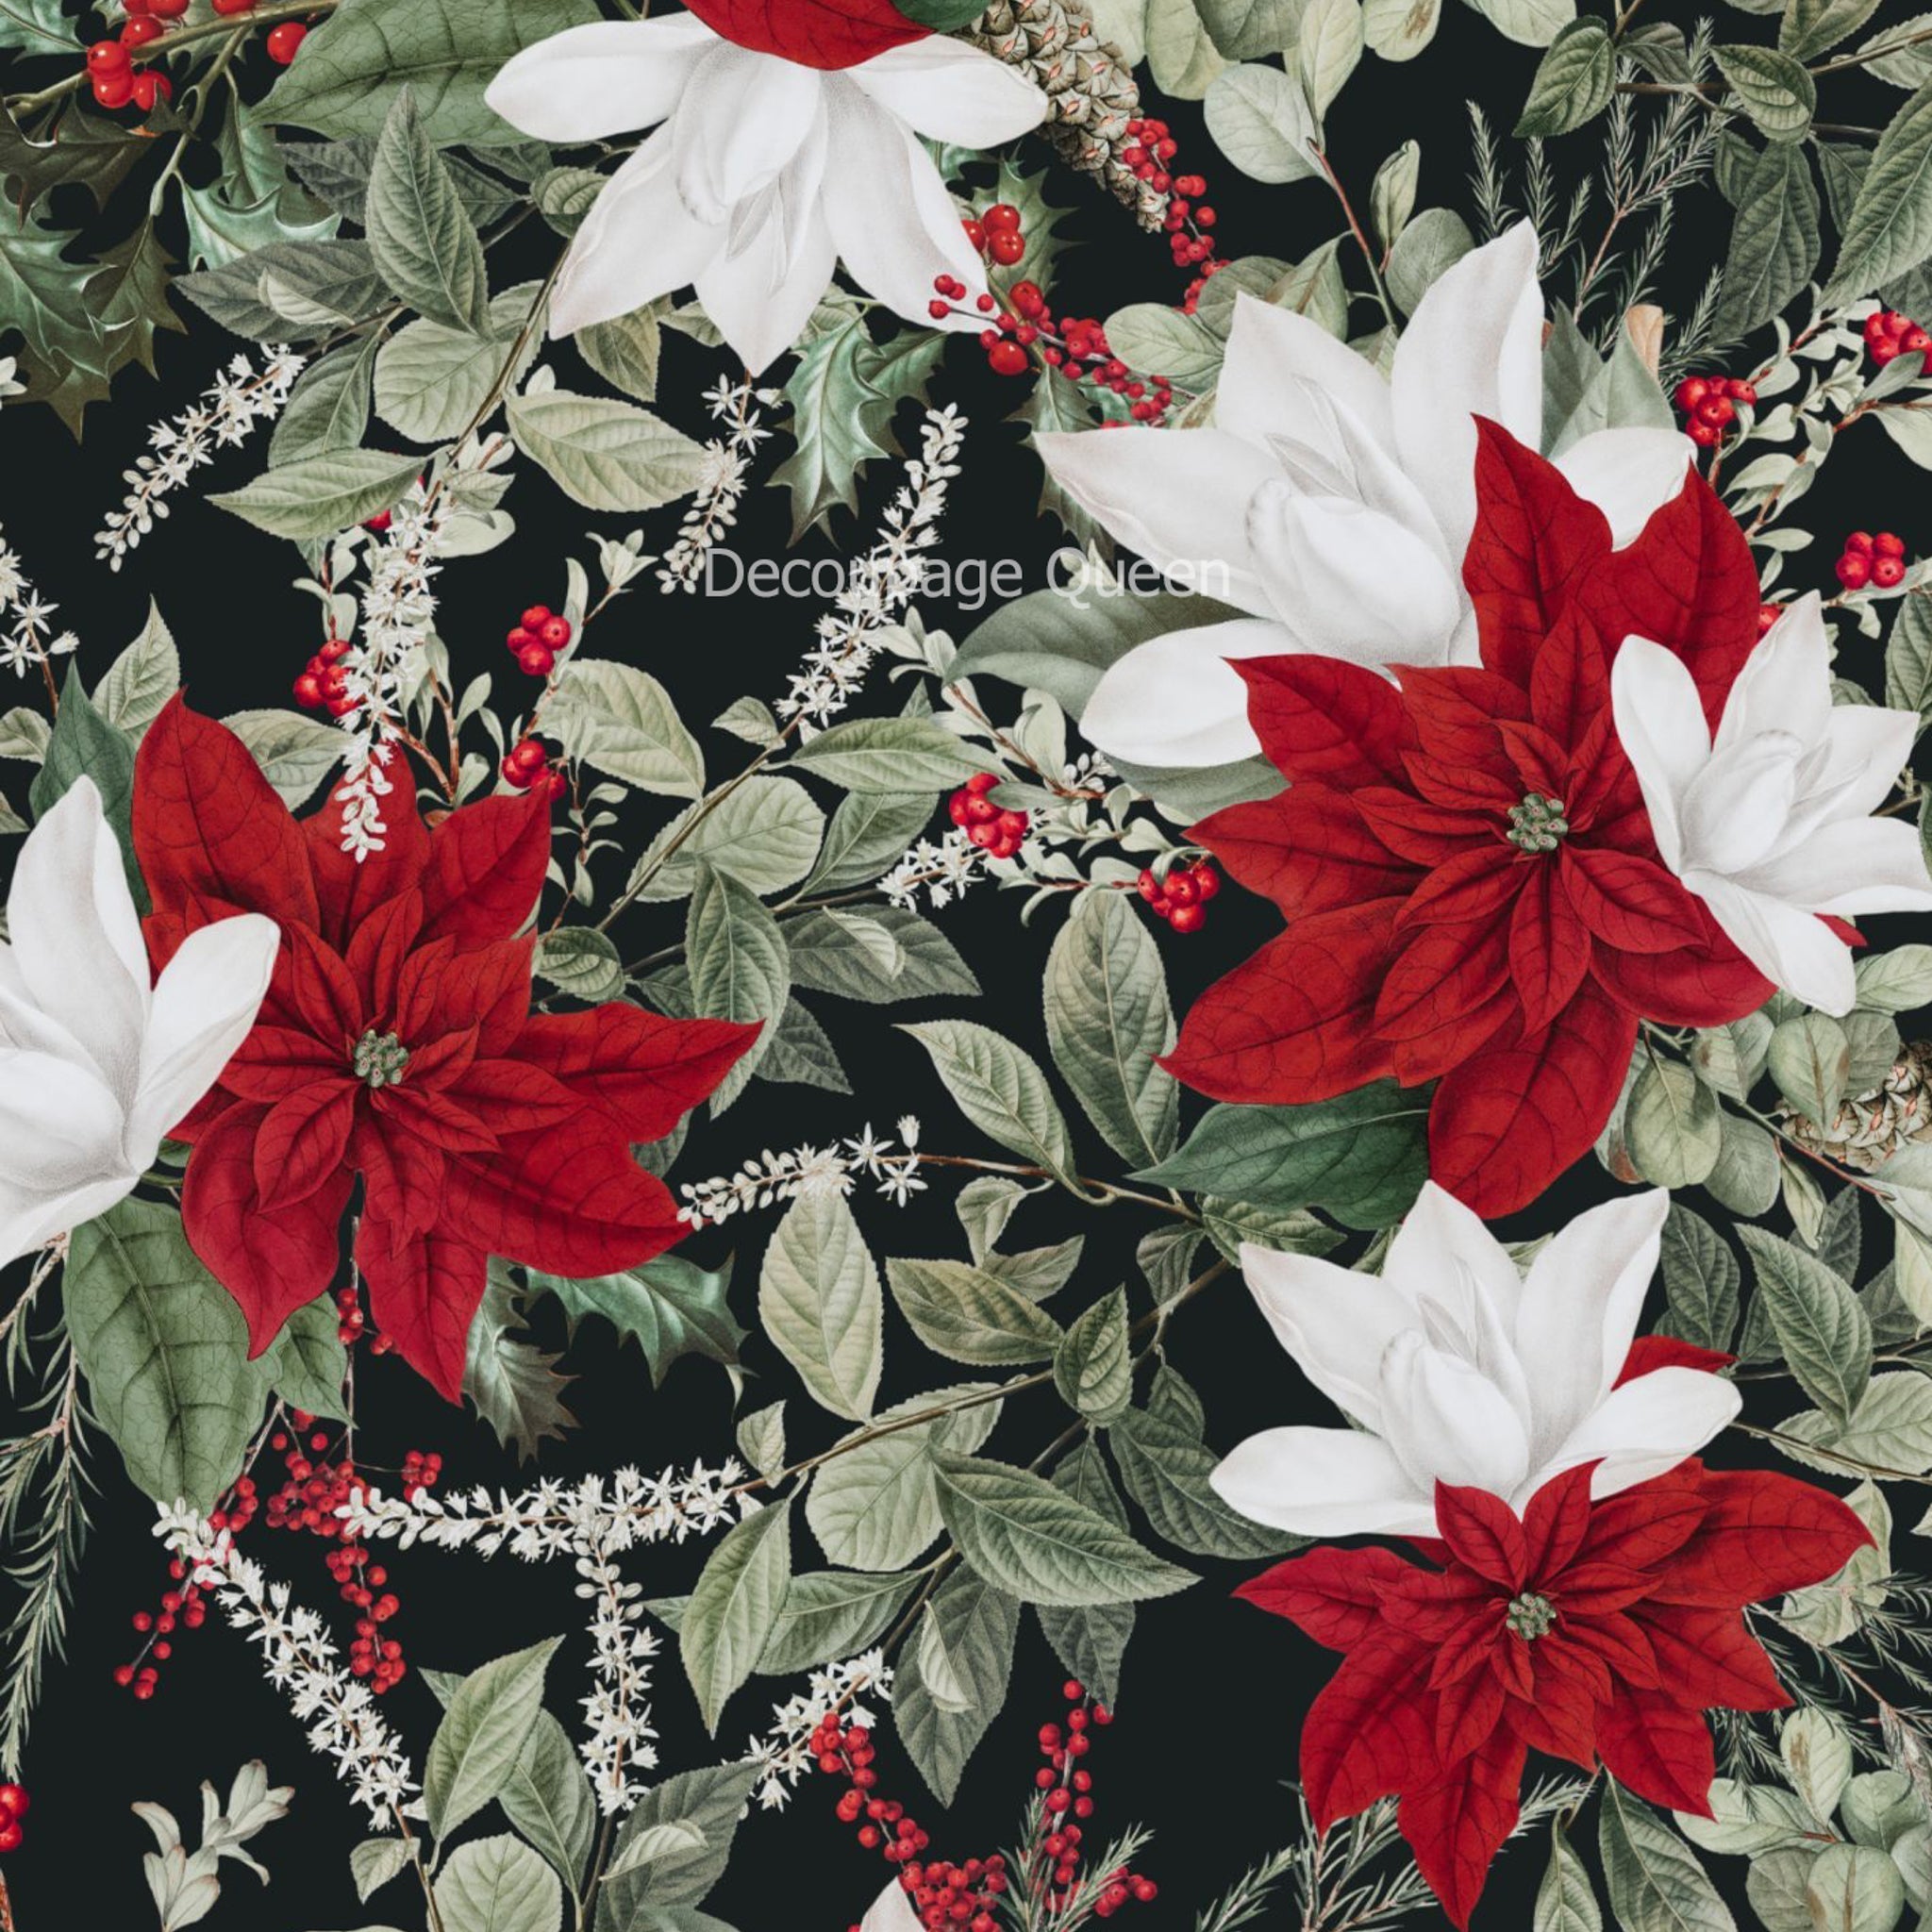 A0 rice paper design of red and white poinsettias with leaves on a black background.